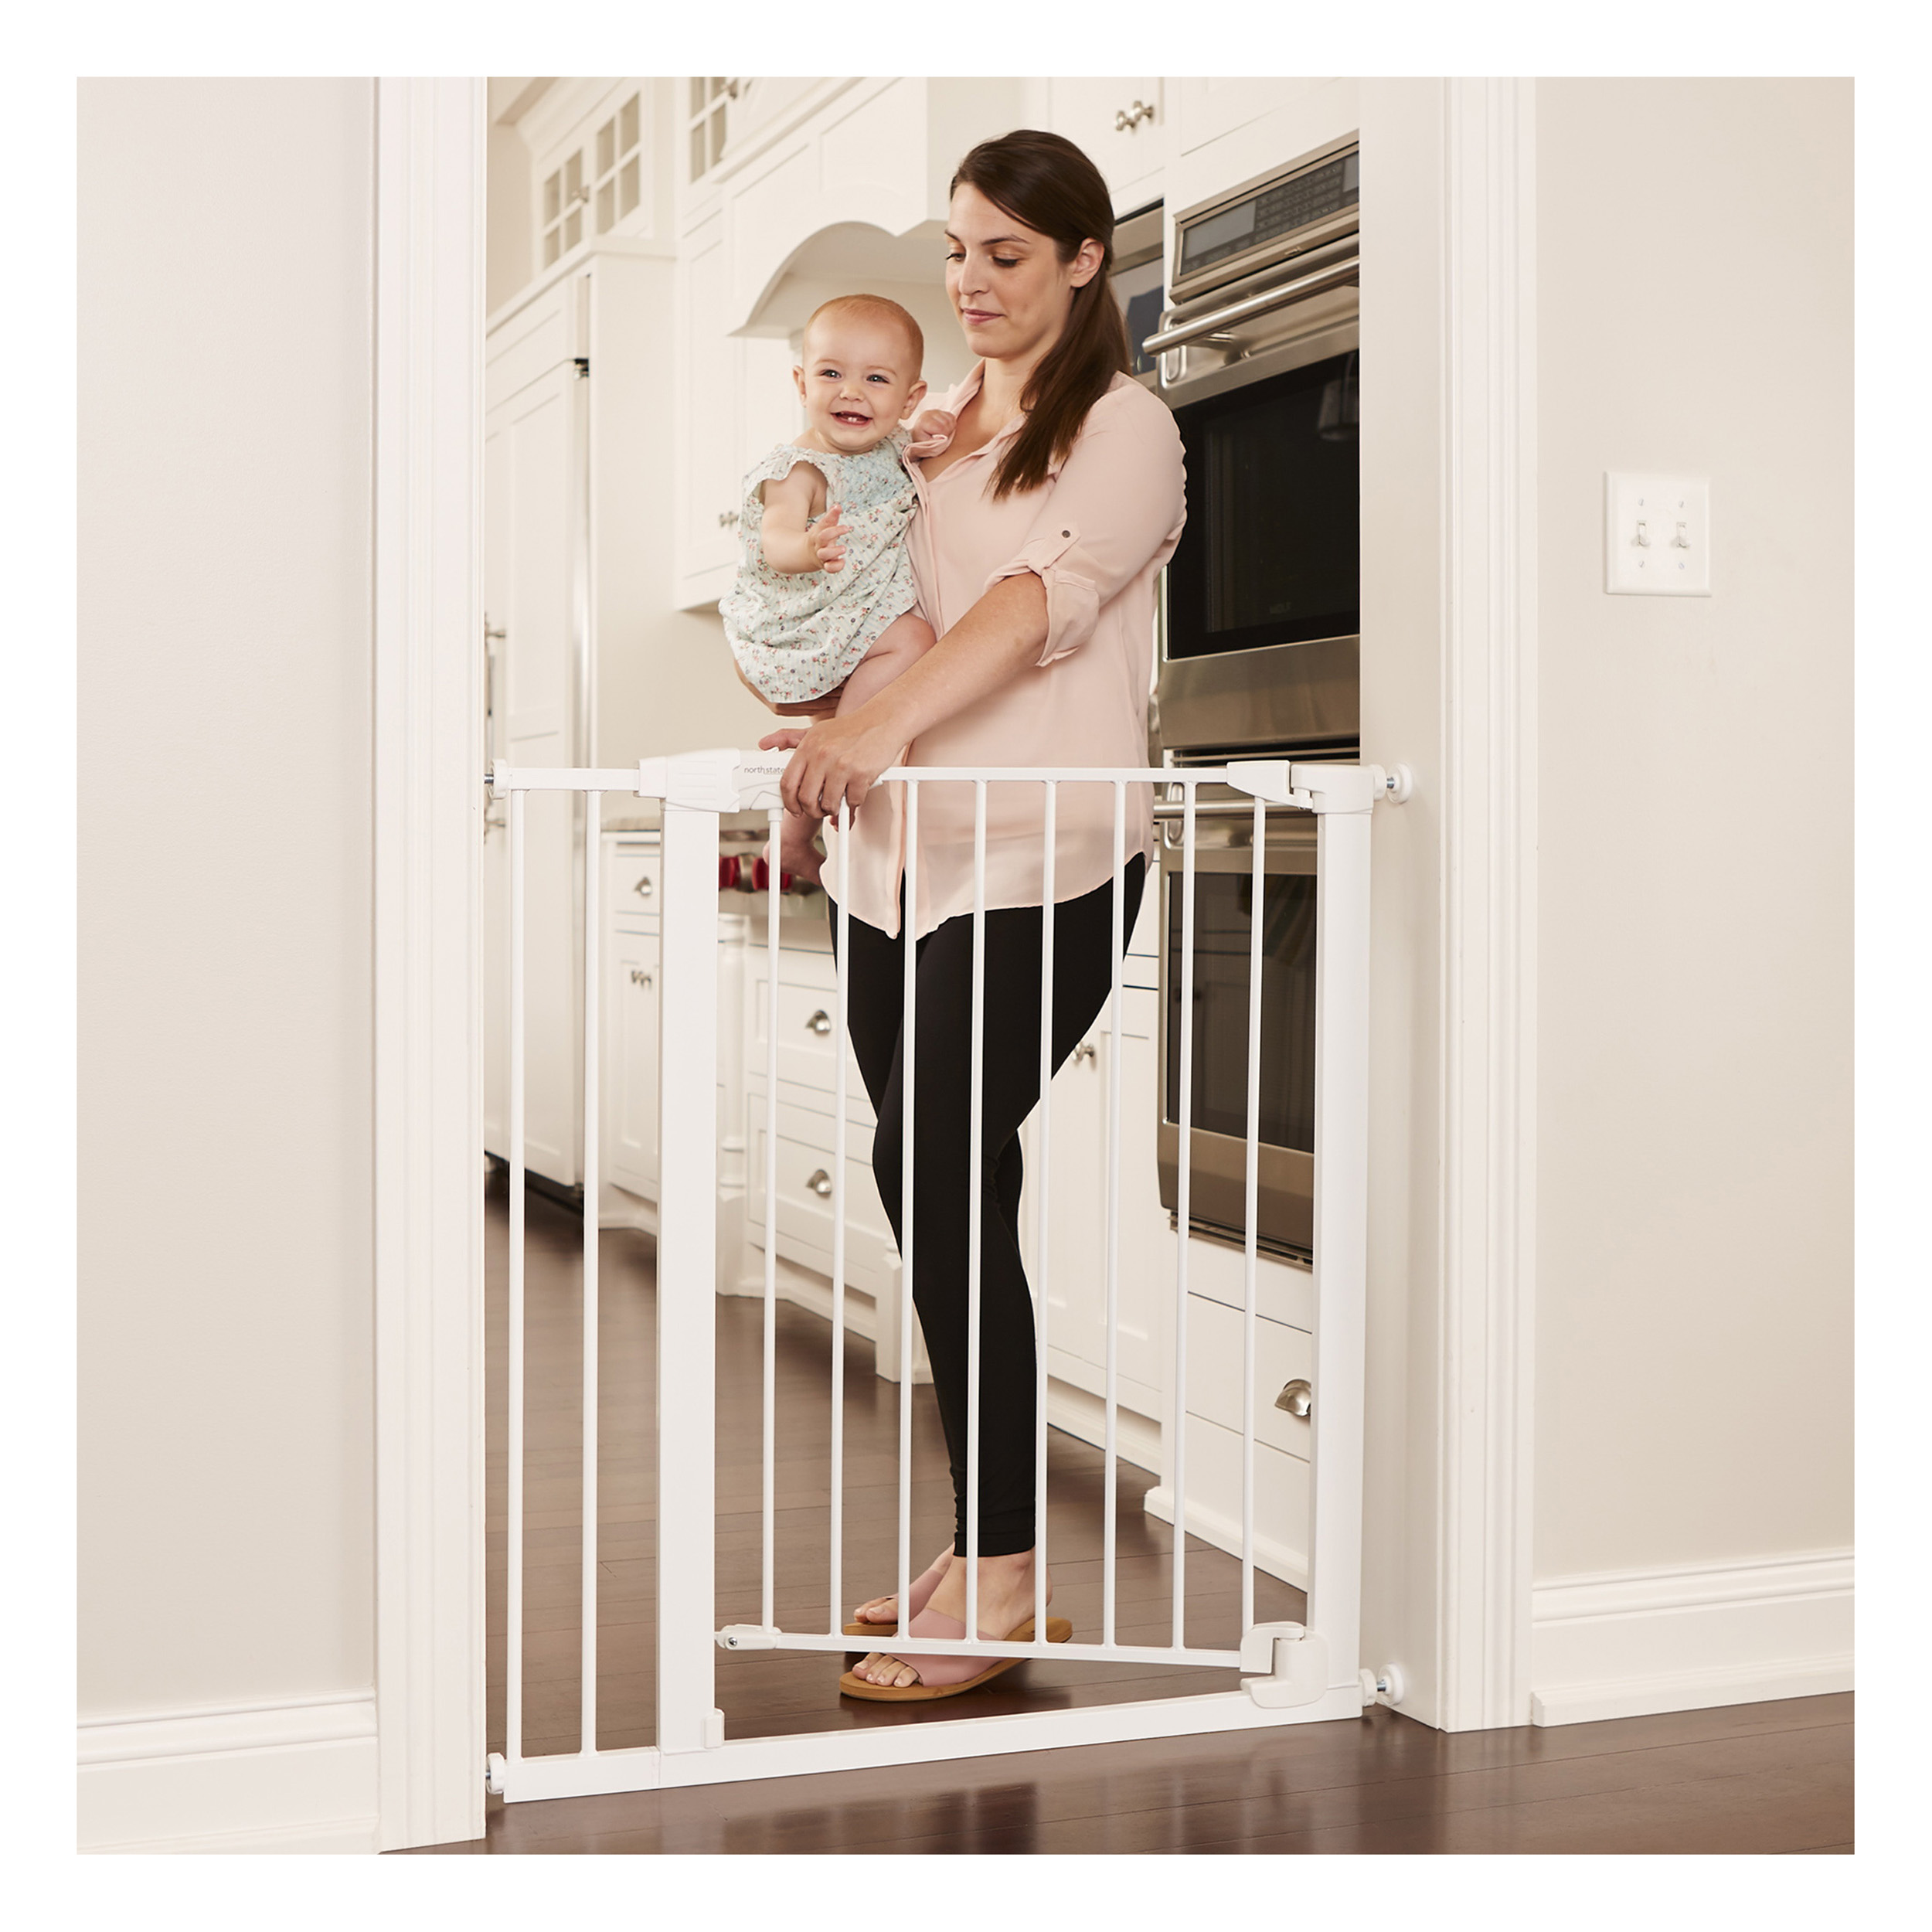 Toddleroo by North States 5337 Auto-Close Gate, Metal, White, 36 in H Dimensions - 5